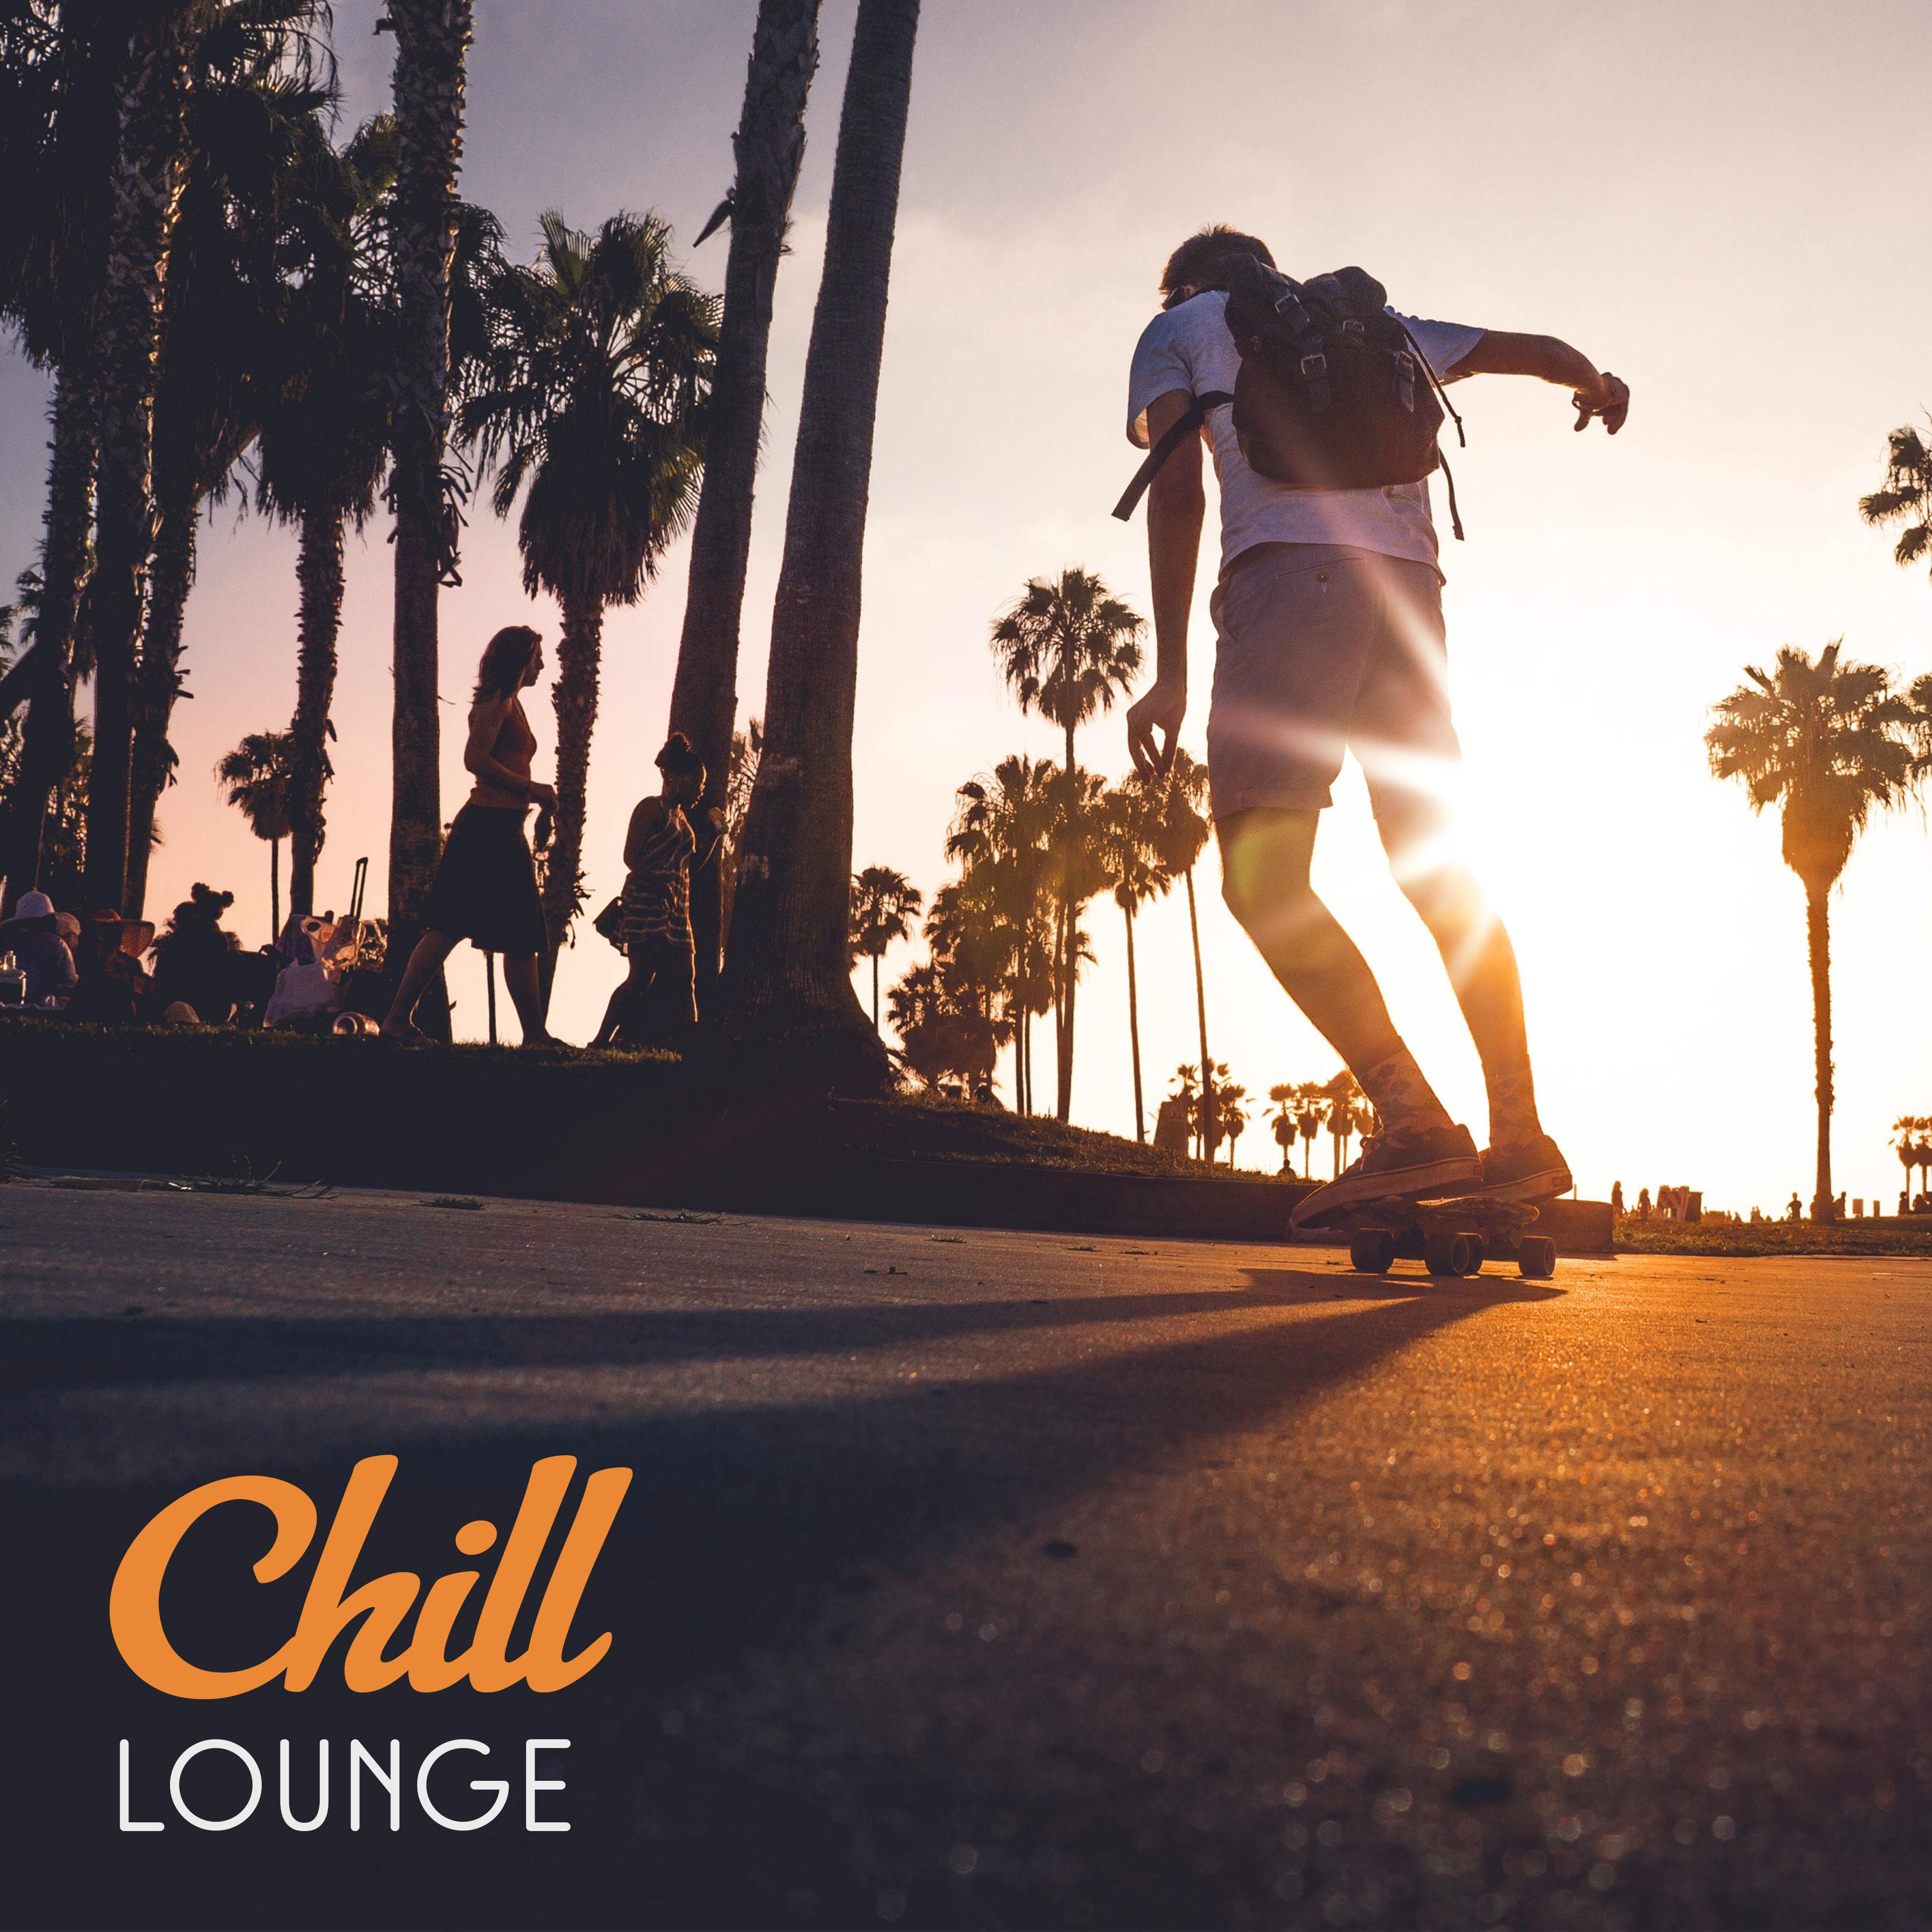 Chill Lounge – Pure Relaxation, Chill Out Mix, Relax on the Beach, Party Night, Ambient Music, Total Rest, Summertime